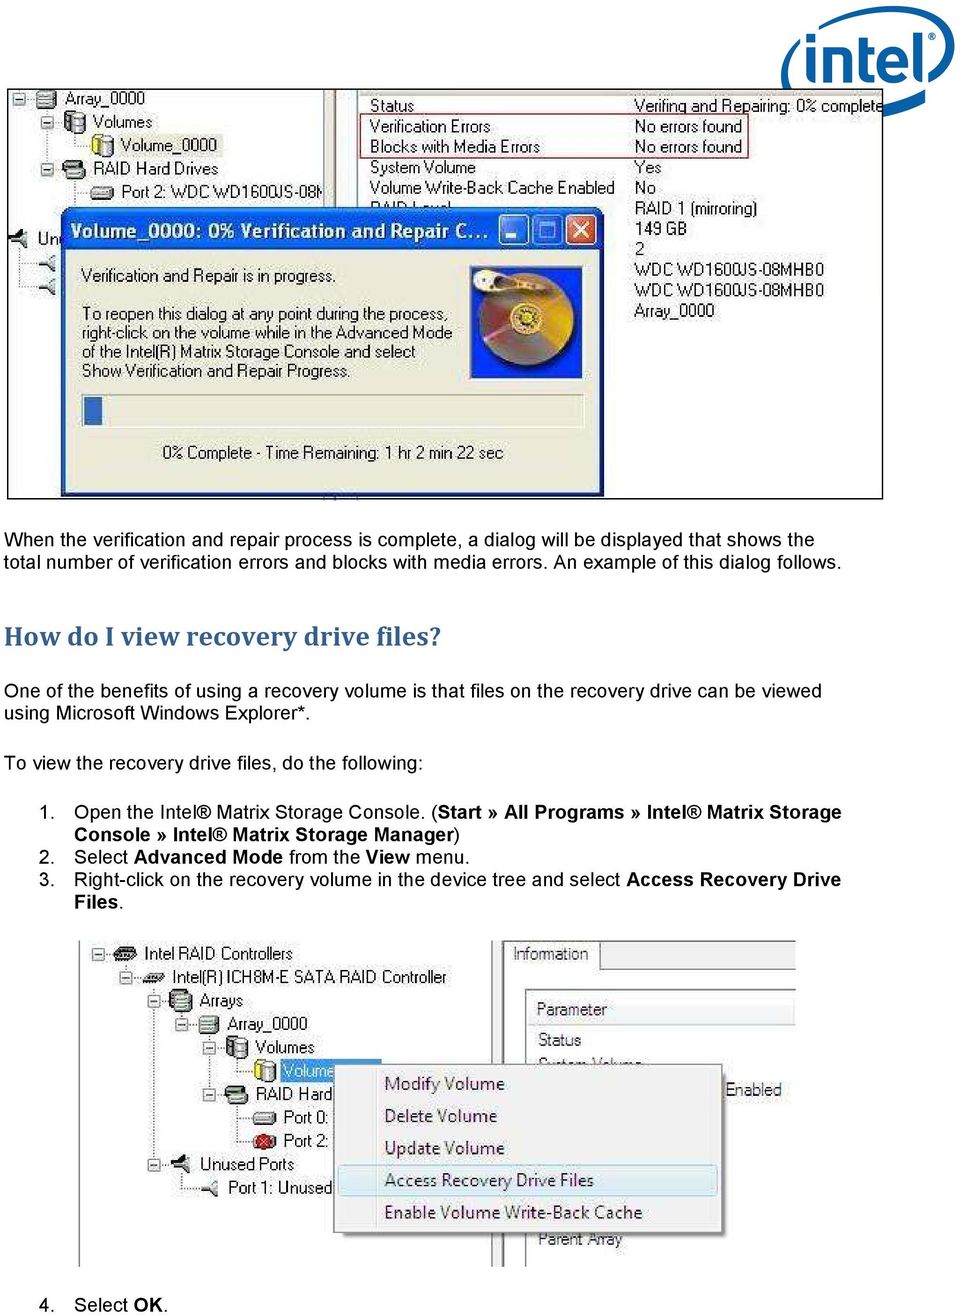 One of the benefits of using a recovery volume is that files on the recovery drive can be viewed using Microsoft Windows Explorer*.